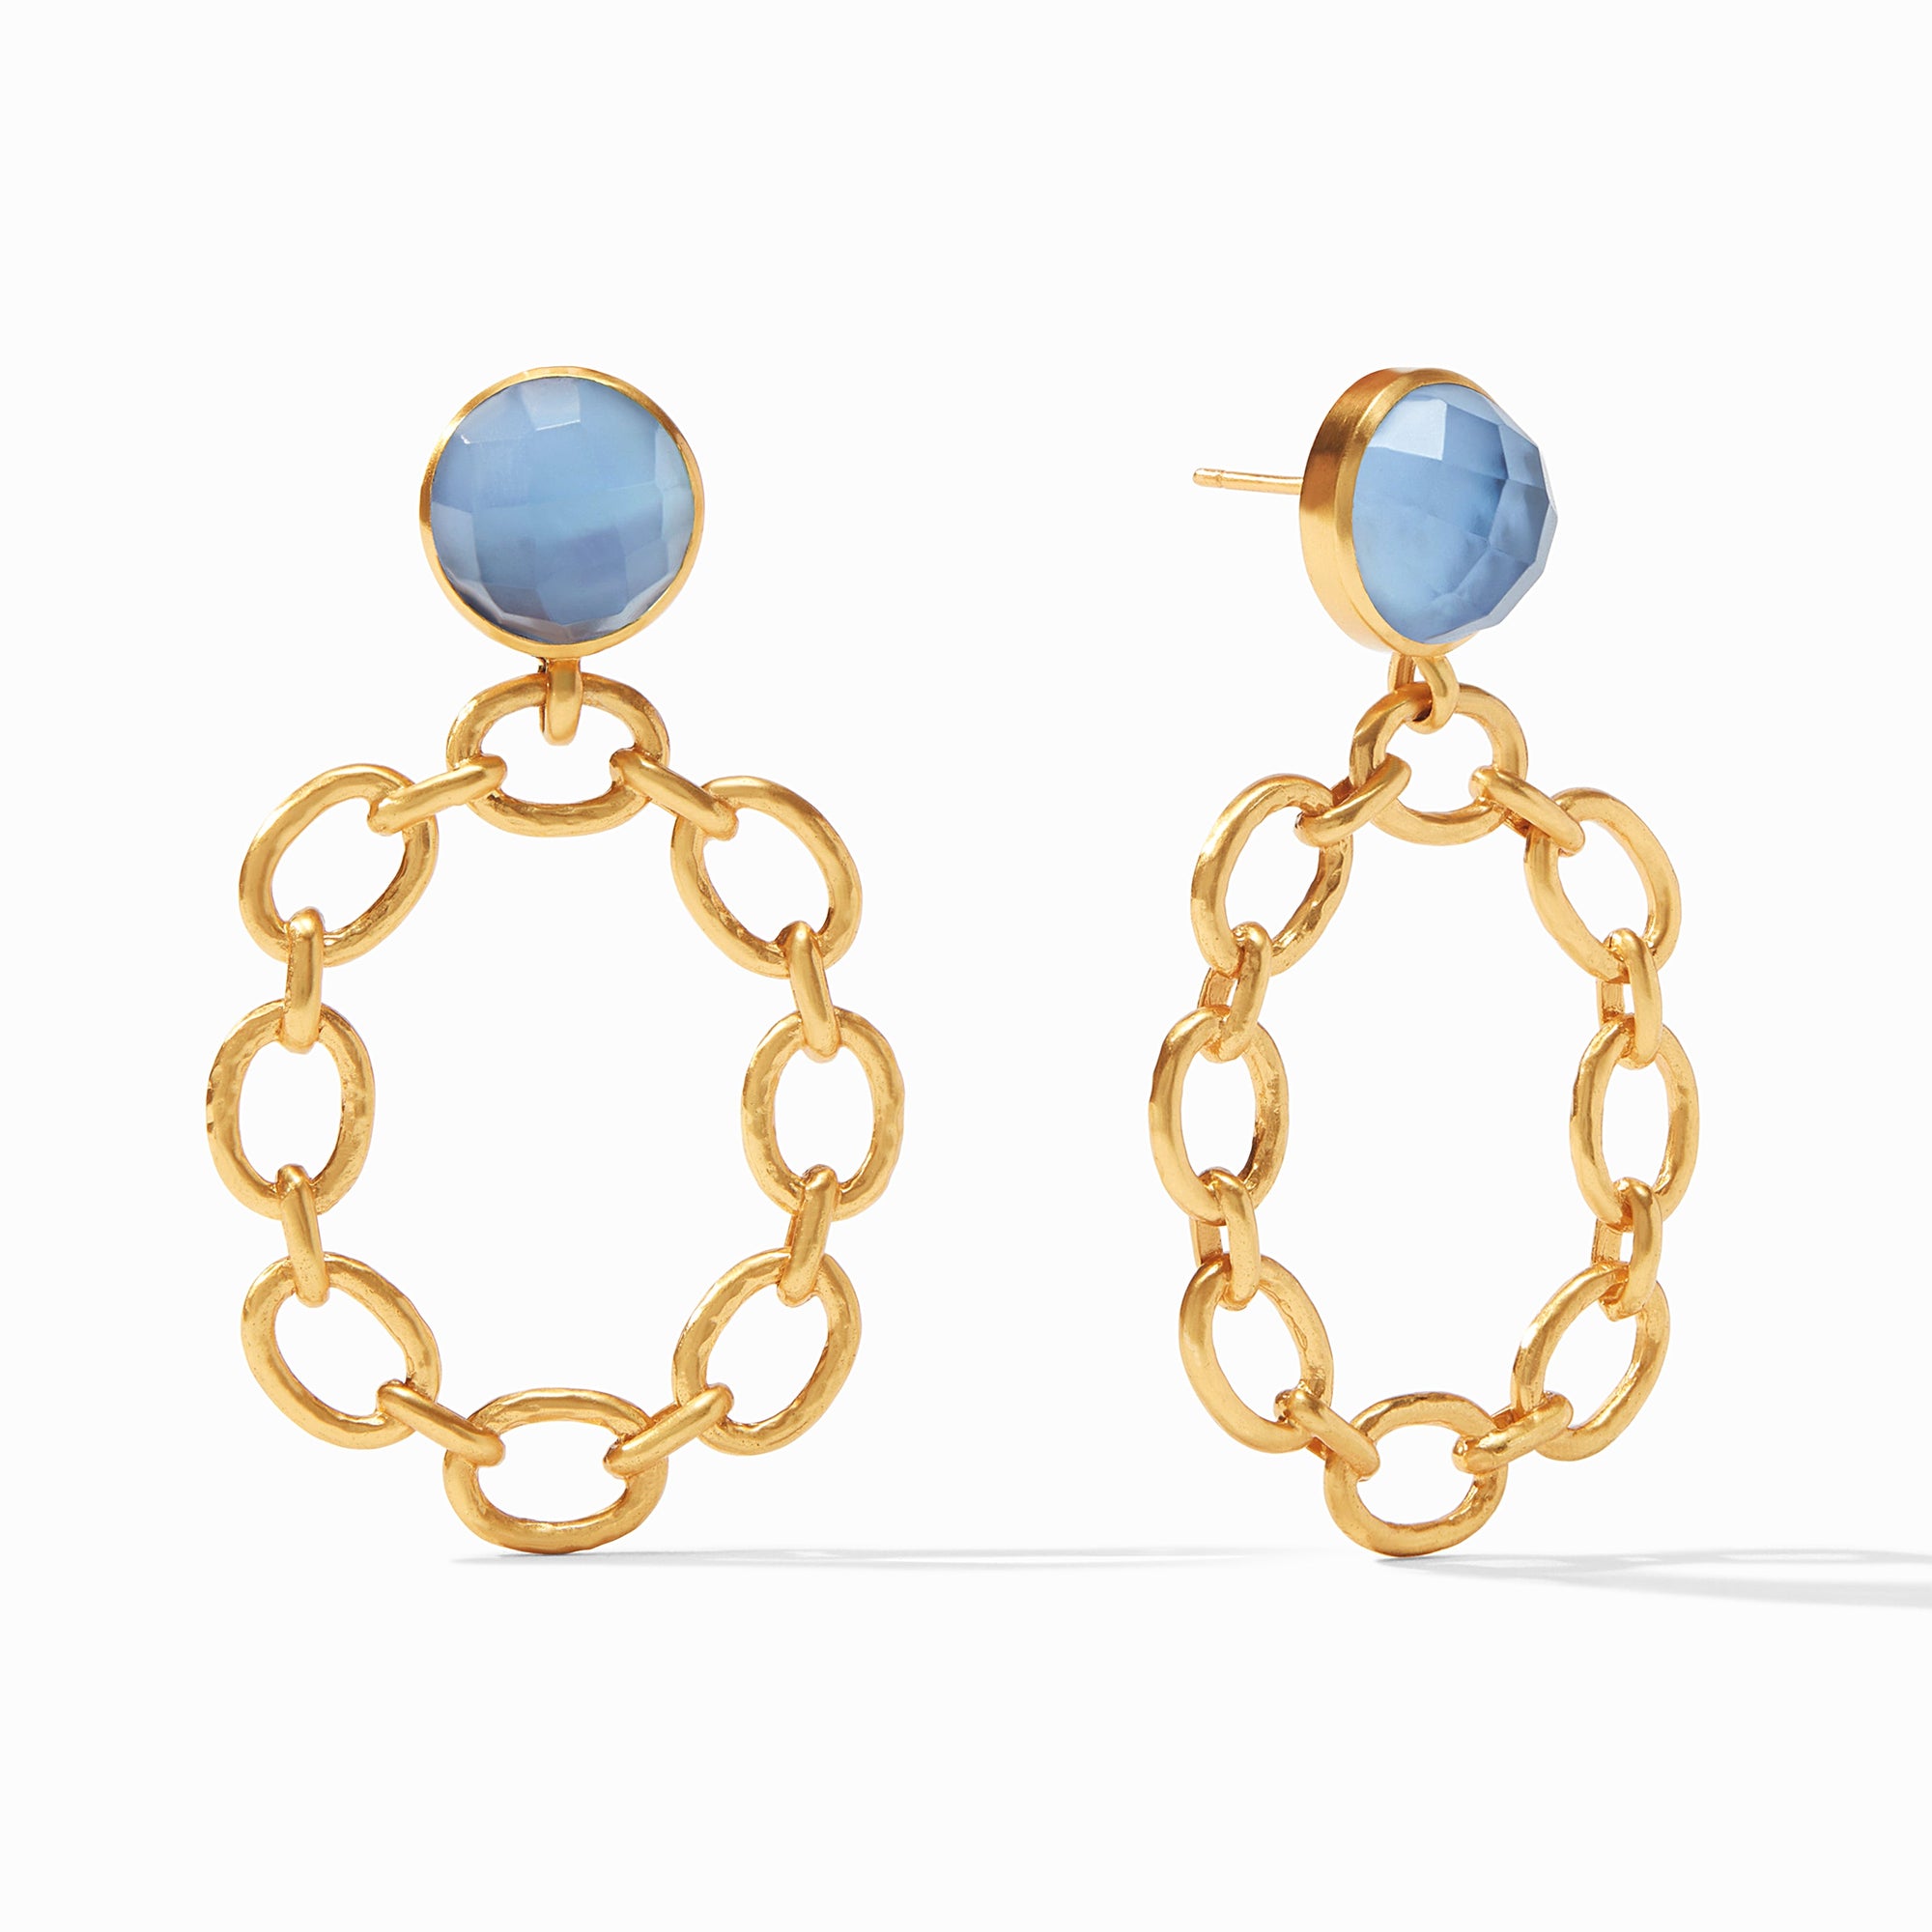 Julie Vos - Palermo Statement Earring, Iridescent Chalcedony Blue